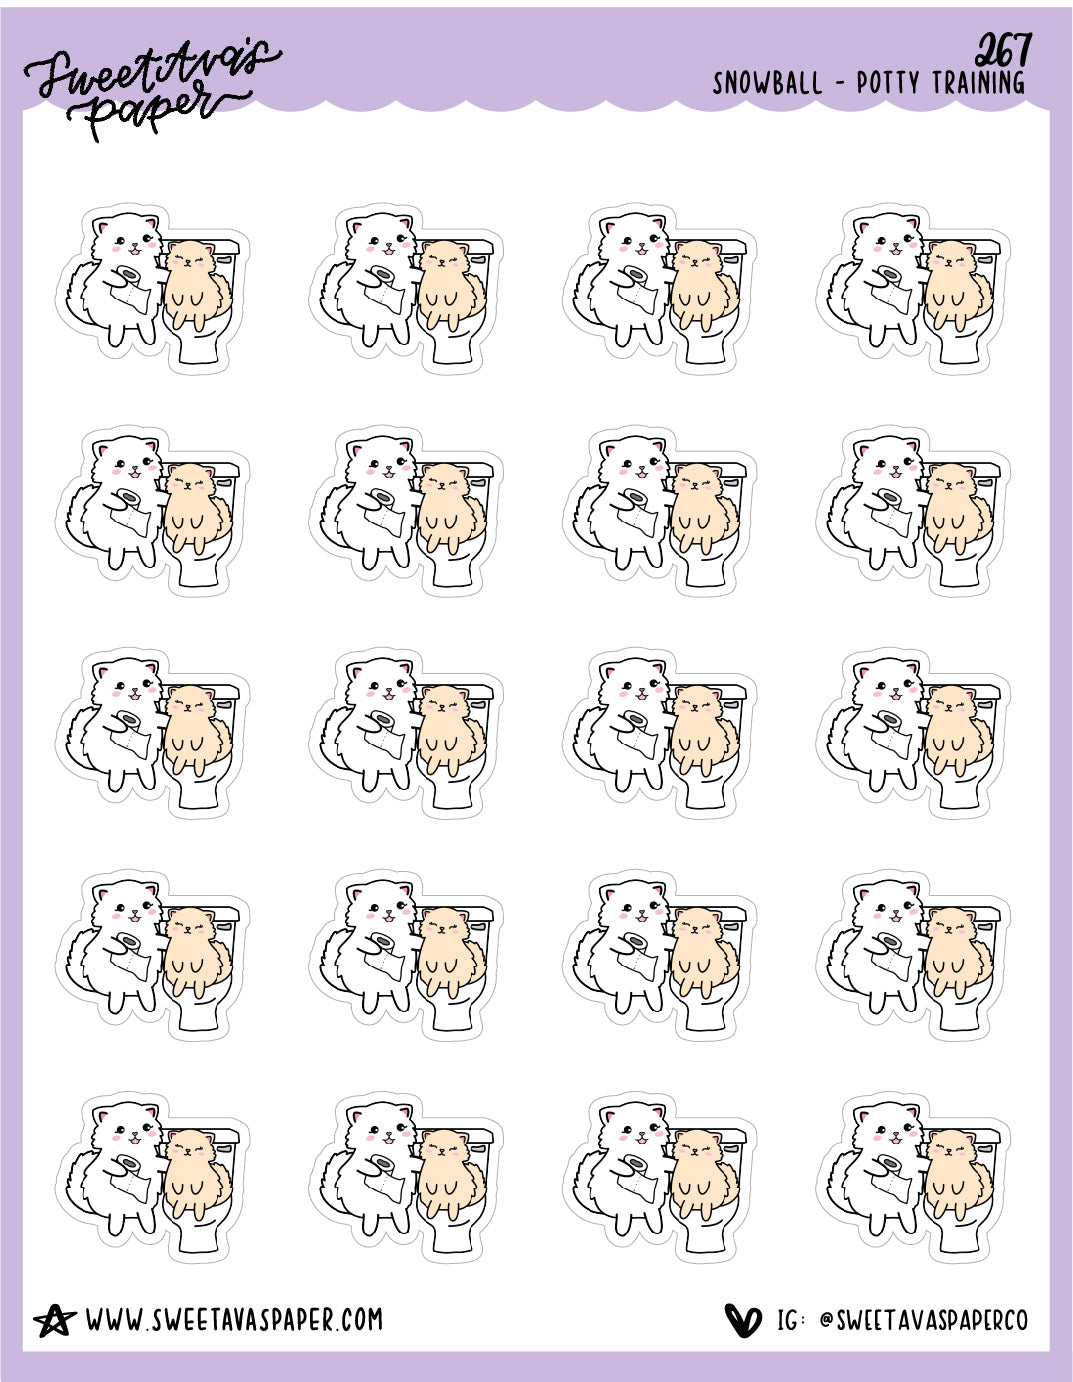 Potty Training Stickers - Snowball The Cat - [267]